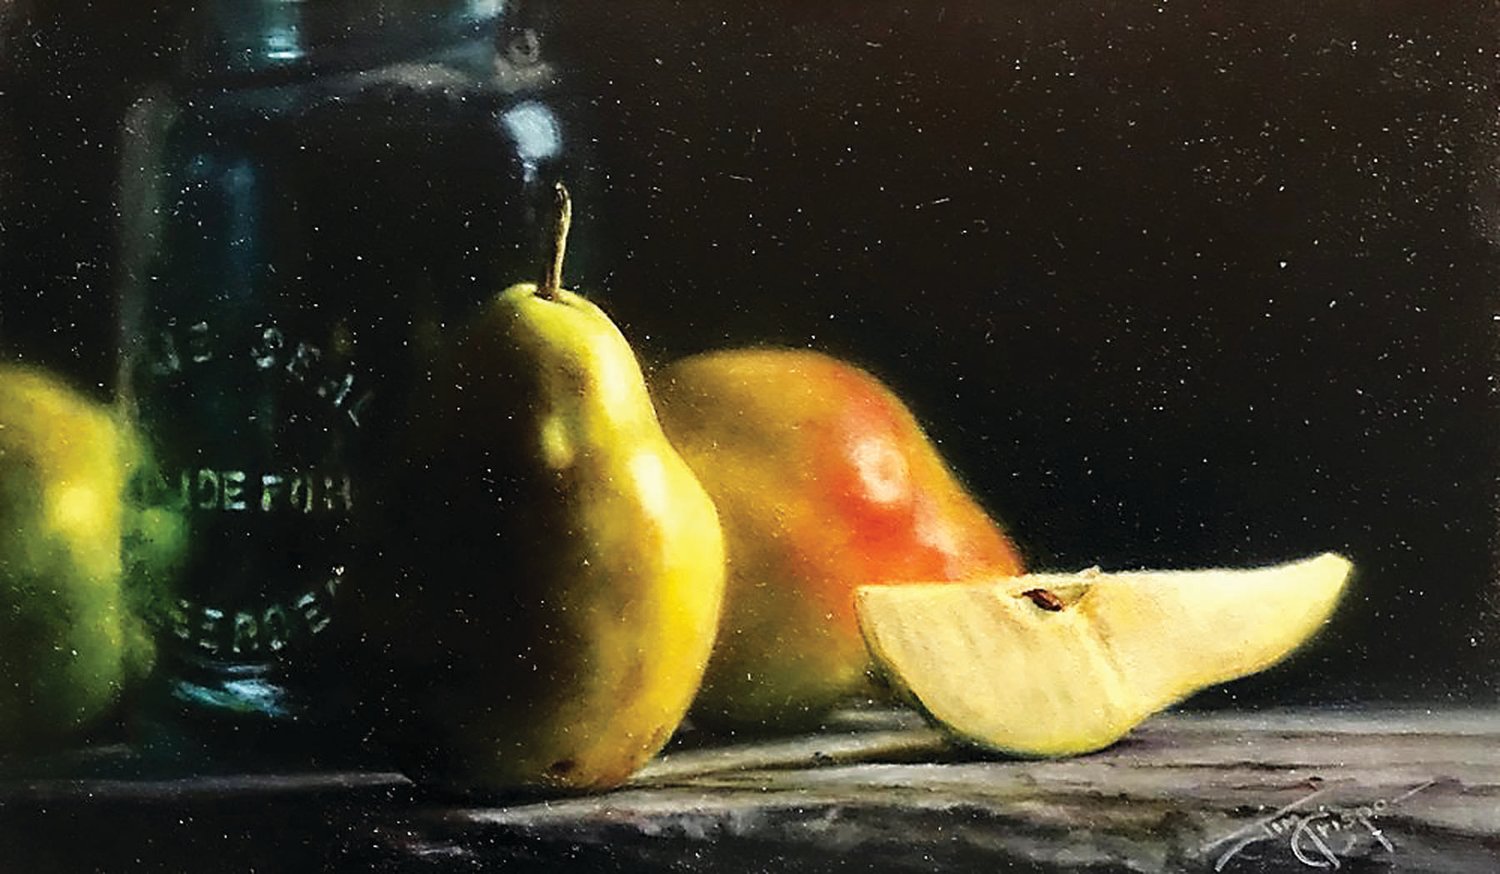 “Pears” is by James Crispo, whose work is on view at The Tubby Olive in Doylestown.